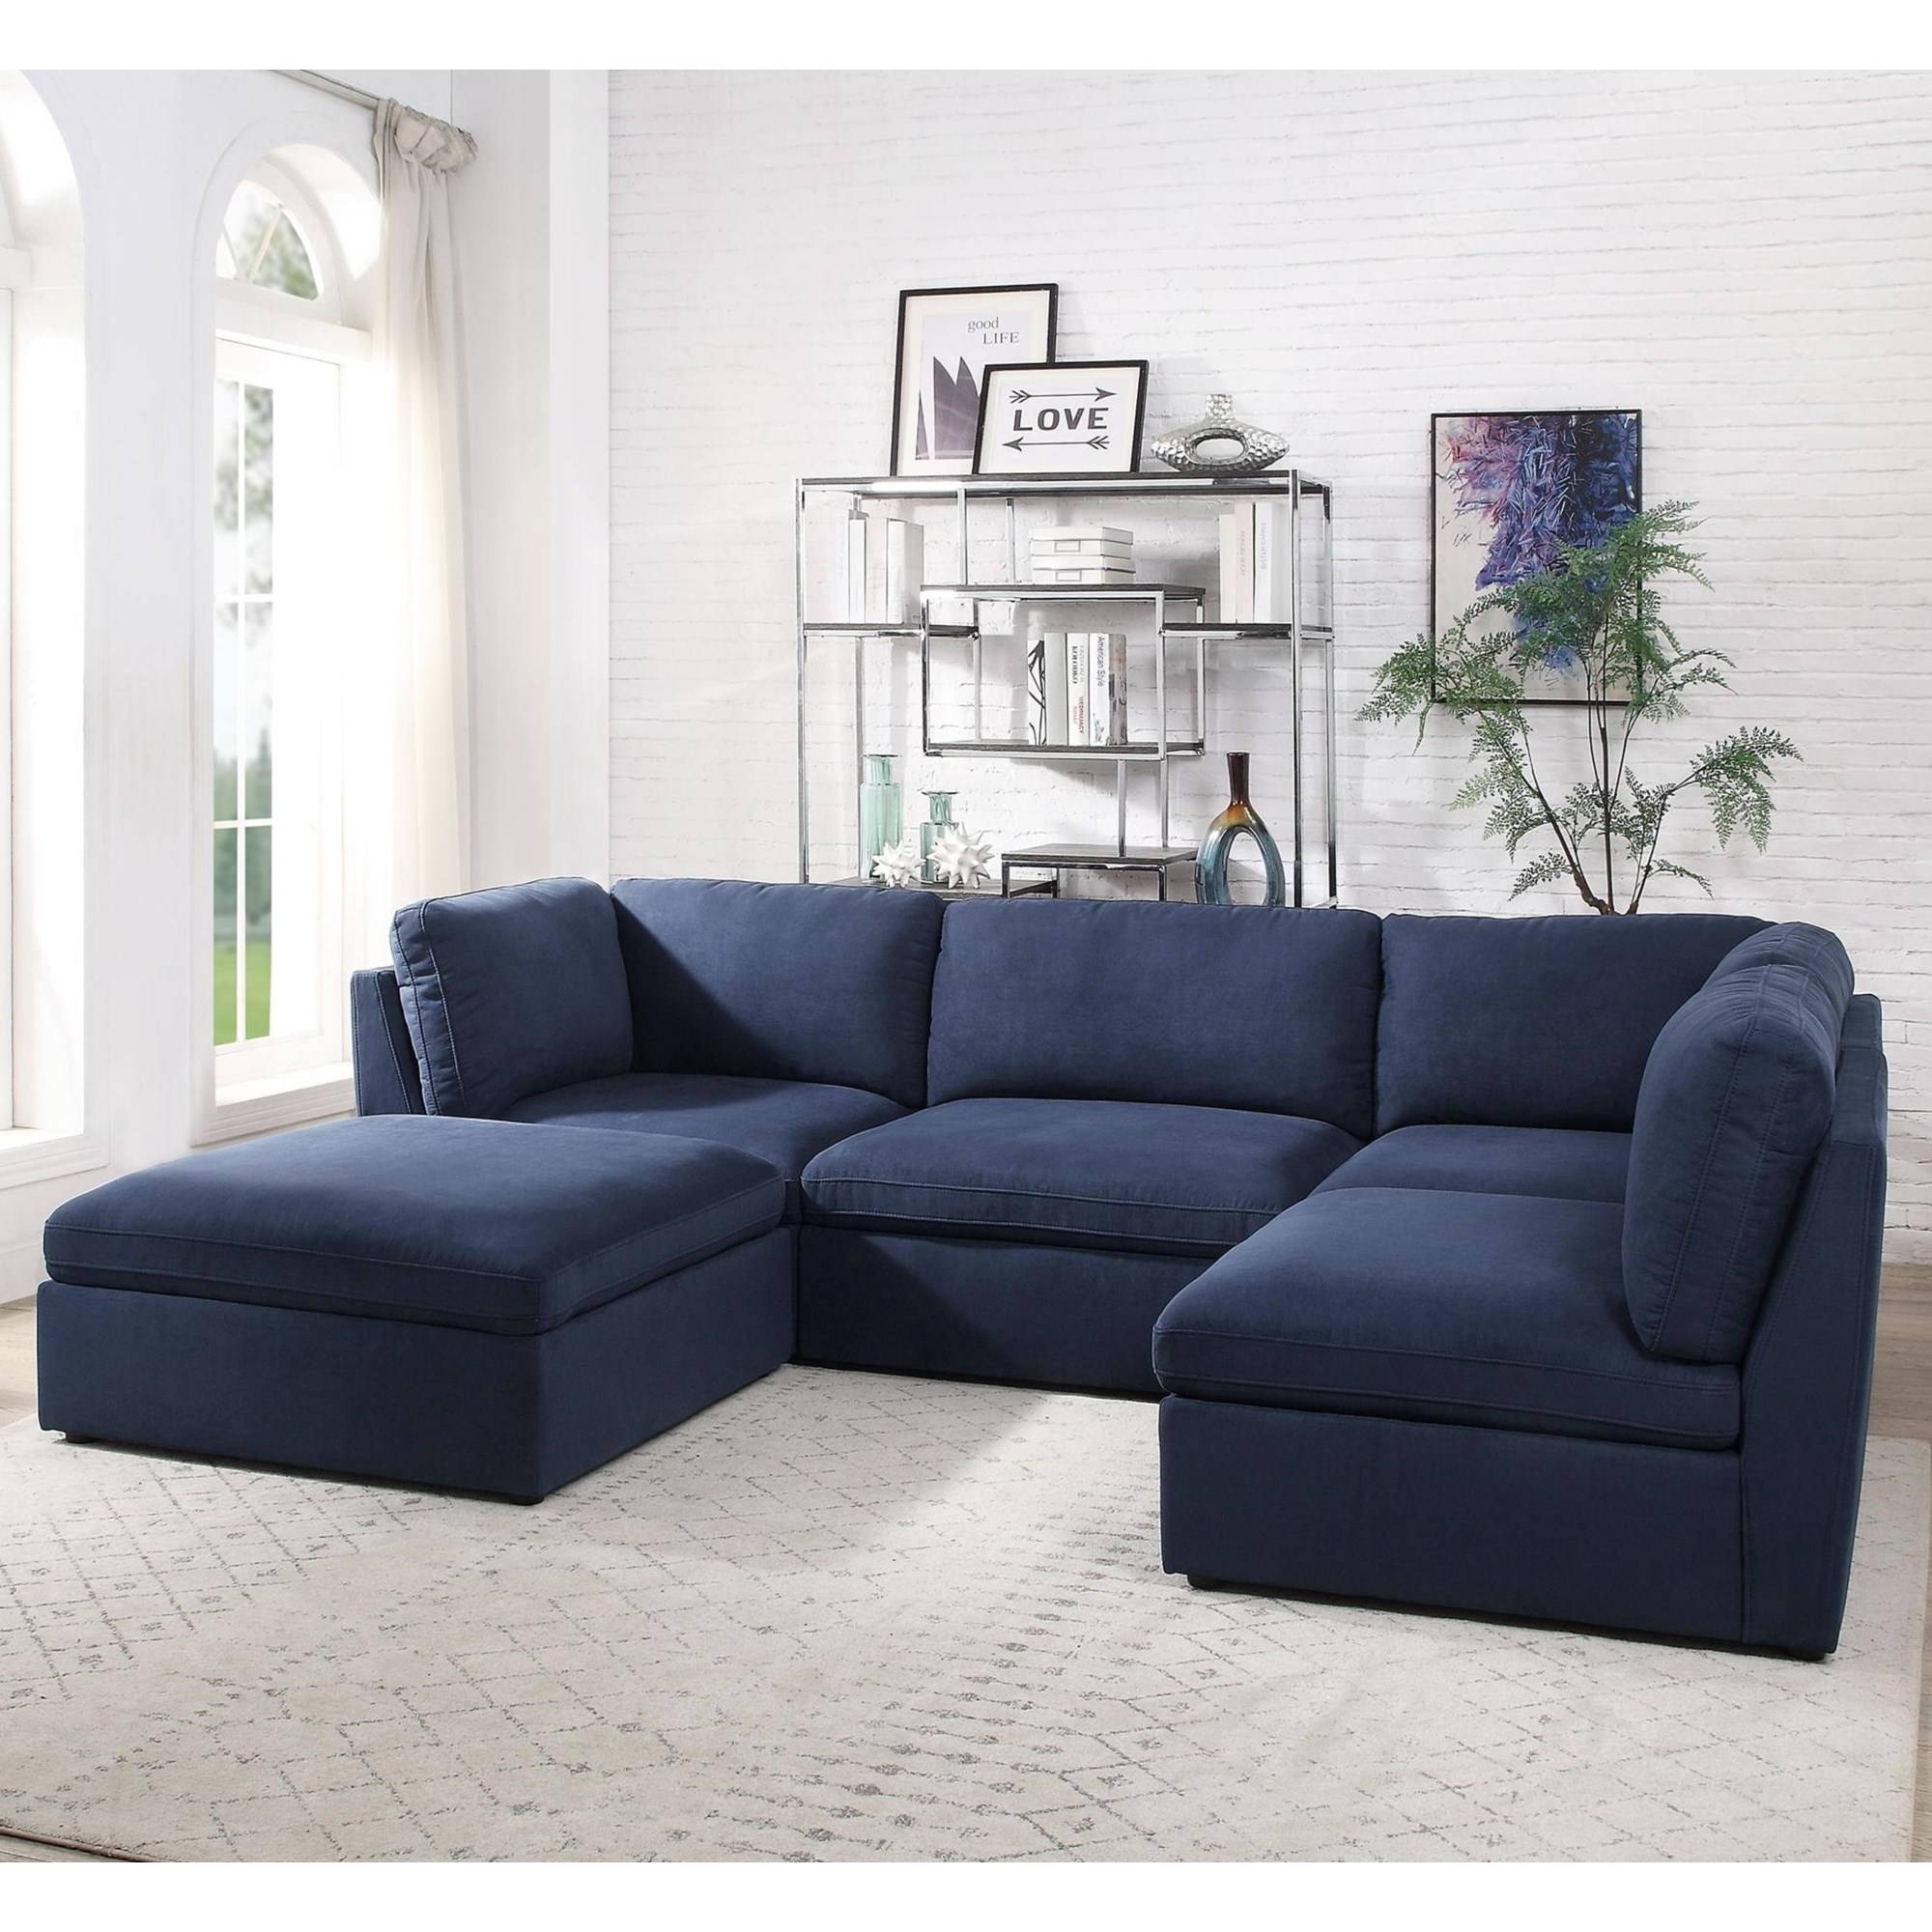 Acme Furniture Crosby 56037+2x6+2x5 Contemporary L-Shaped Sectional with  Ottoman, A1 Furniture & Mattress